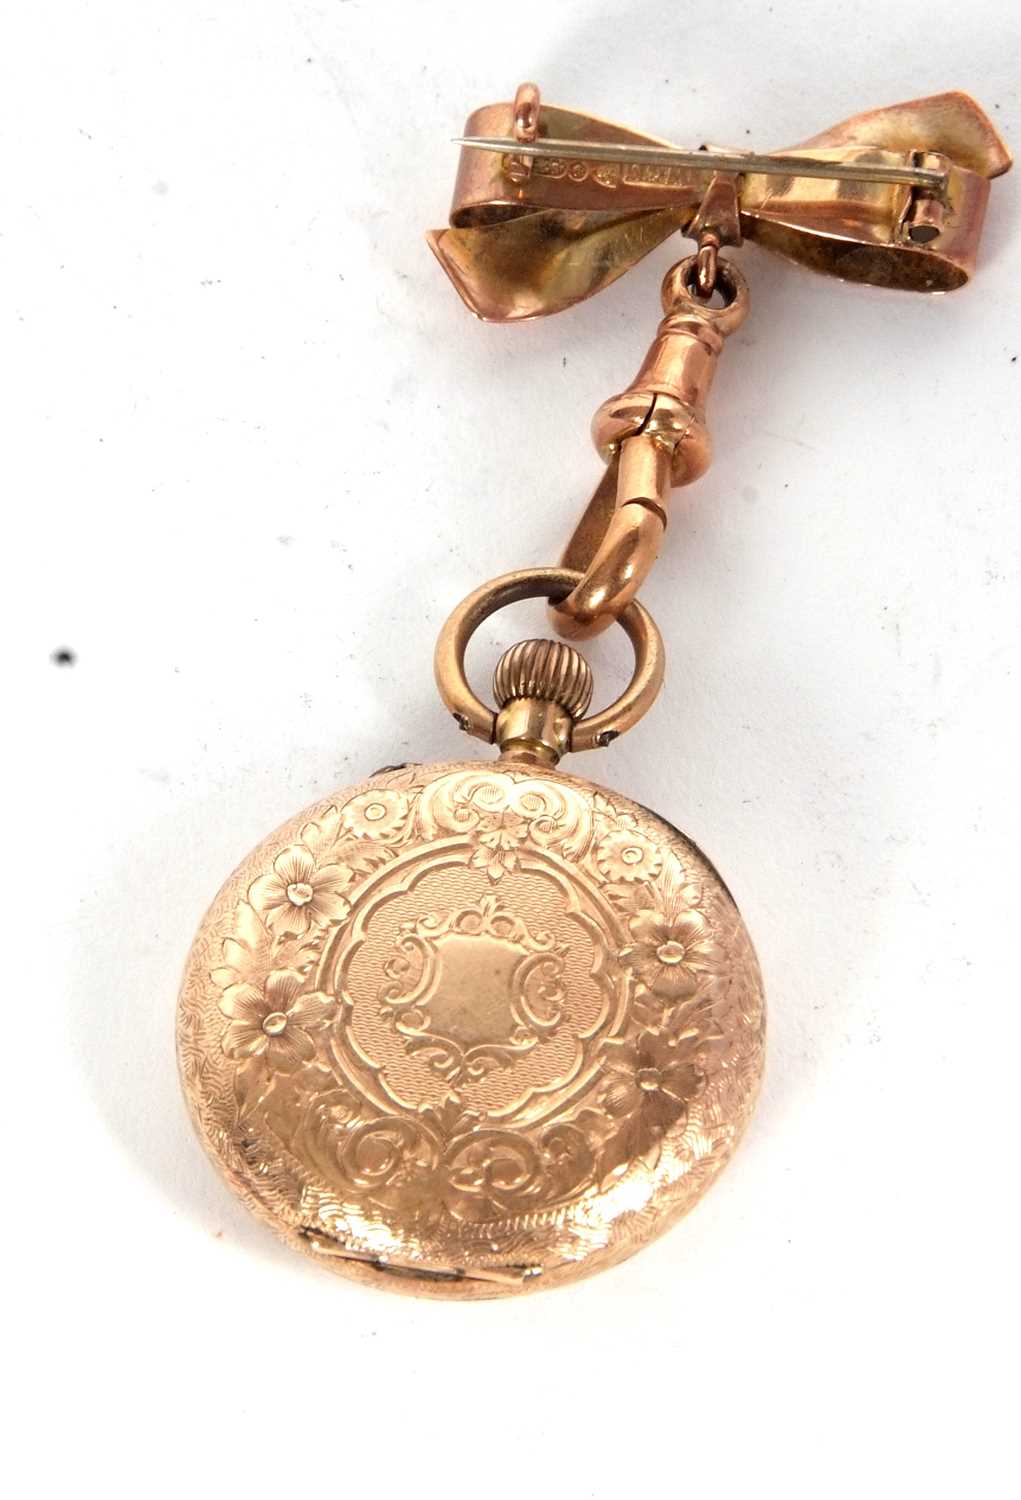 A yellow metal fob watch with 9ct bow pin, the pocket watch is stamped 14k on the inside of the case - Image 3 of 3